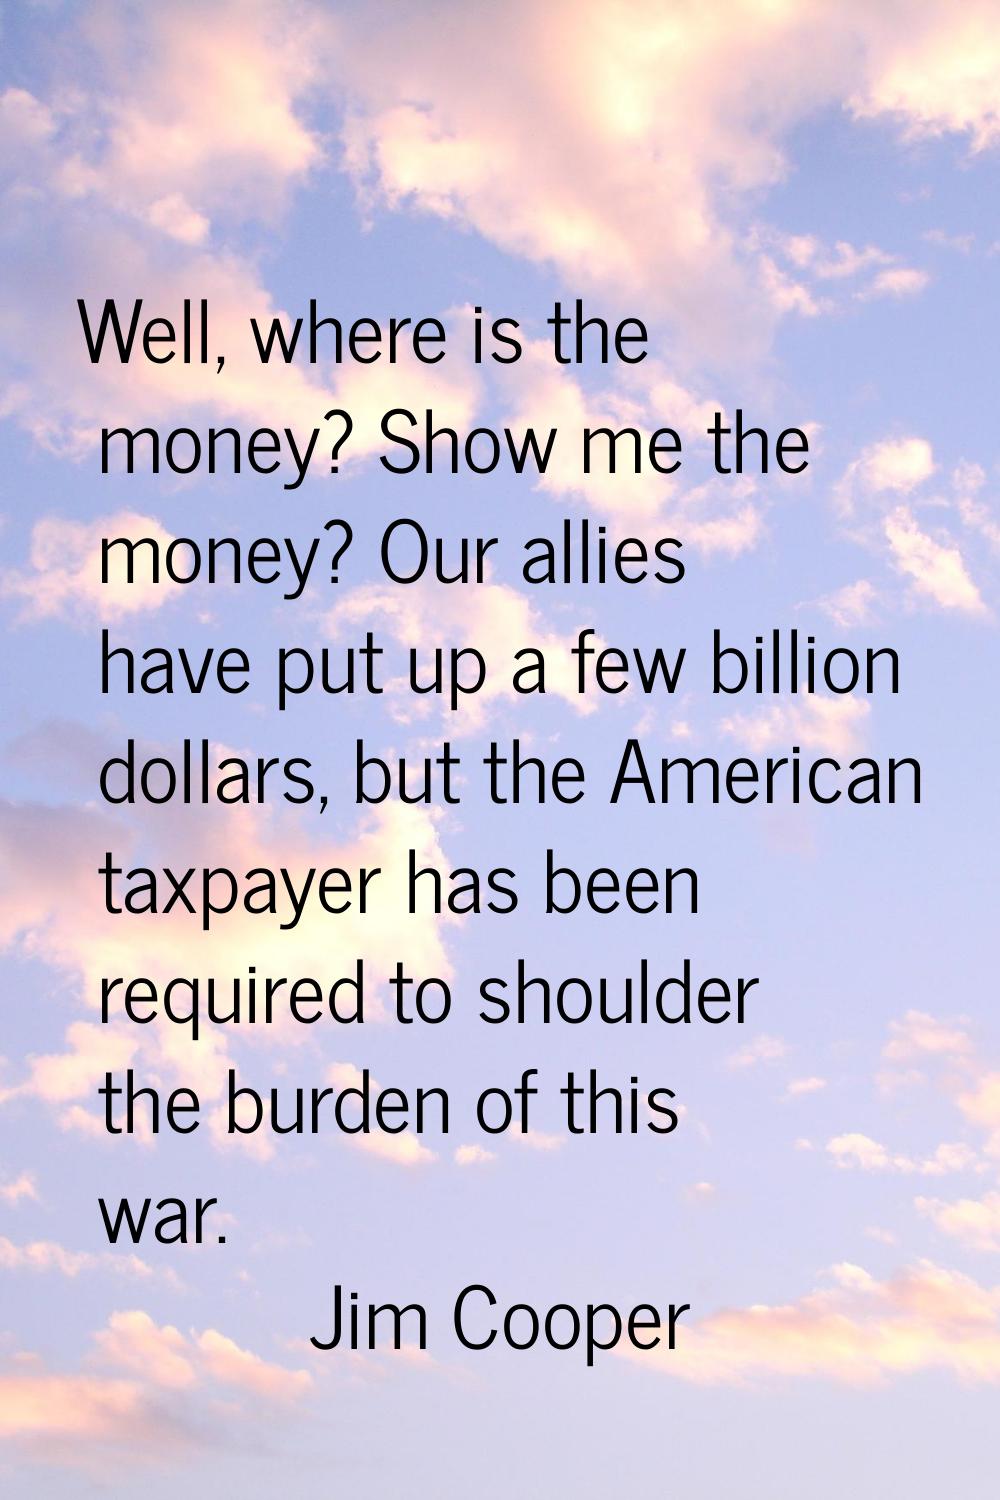 Well, where is the money? Show me the money? Our allies have put up a few billion dollars, but the 